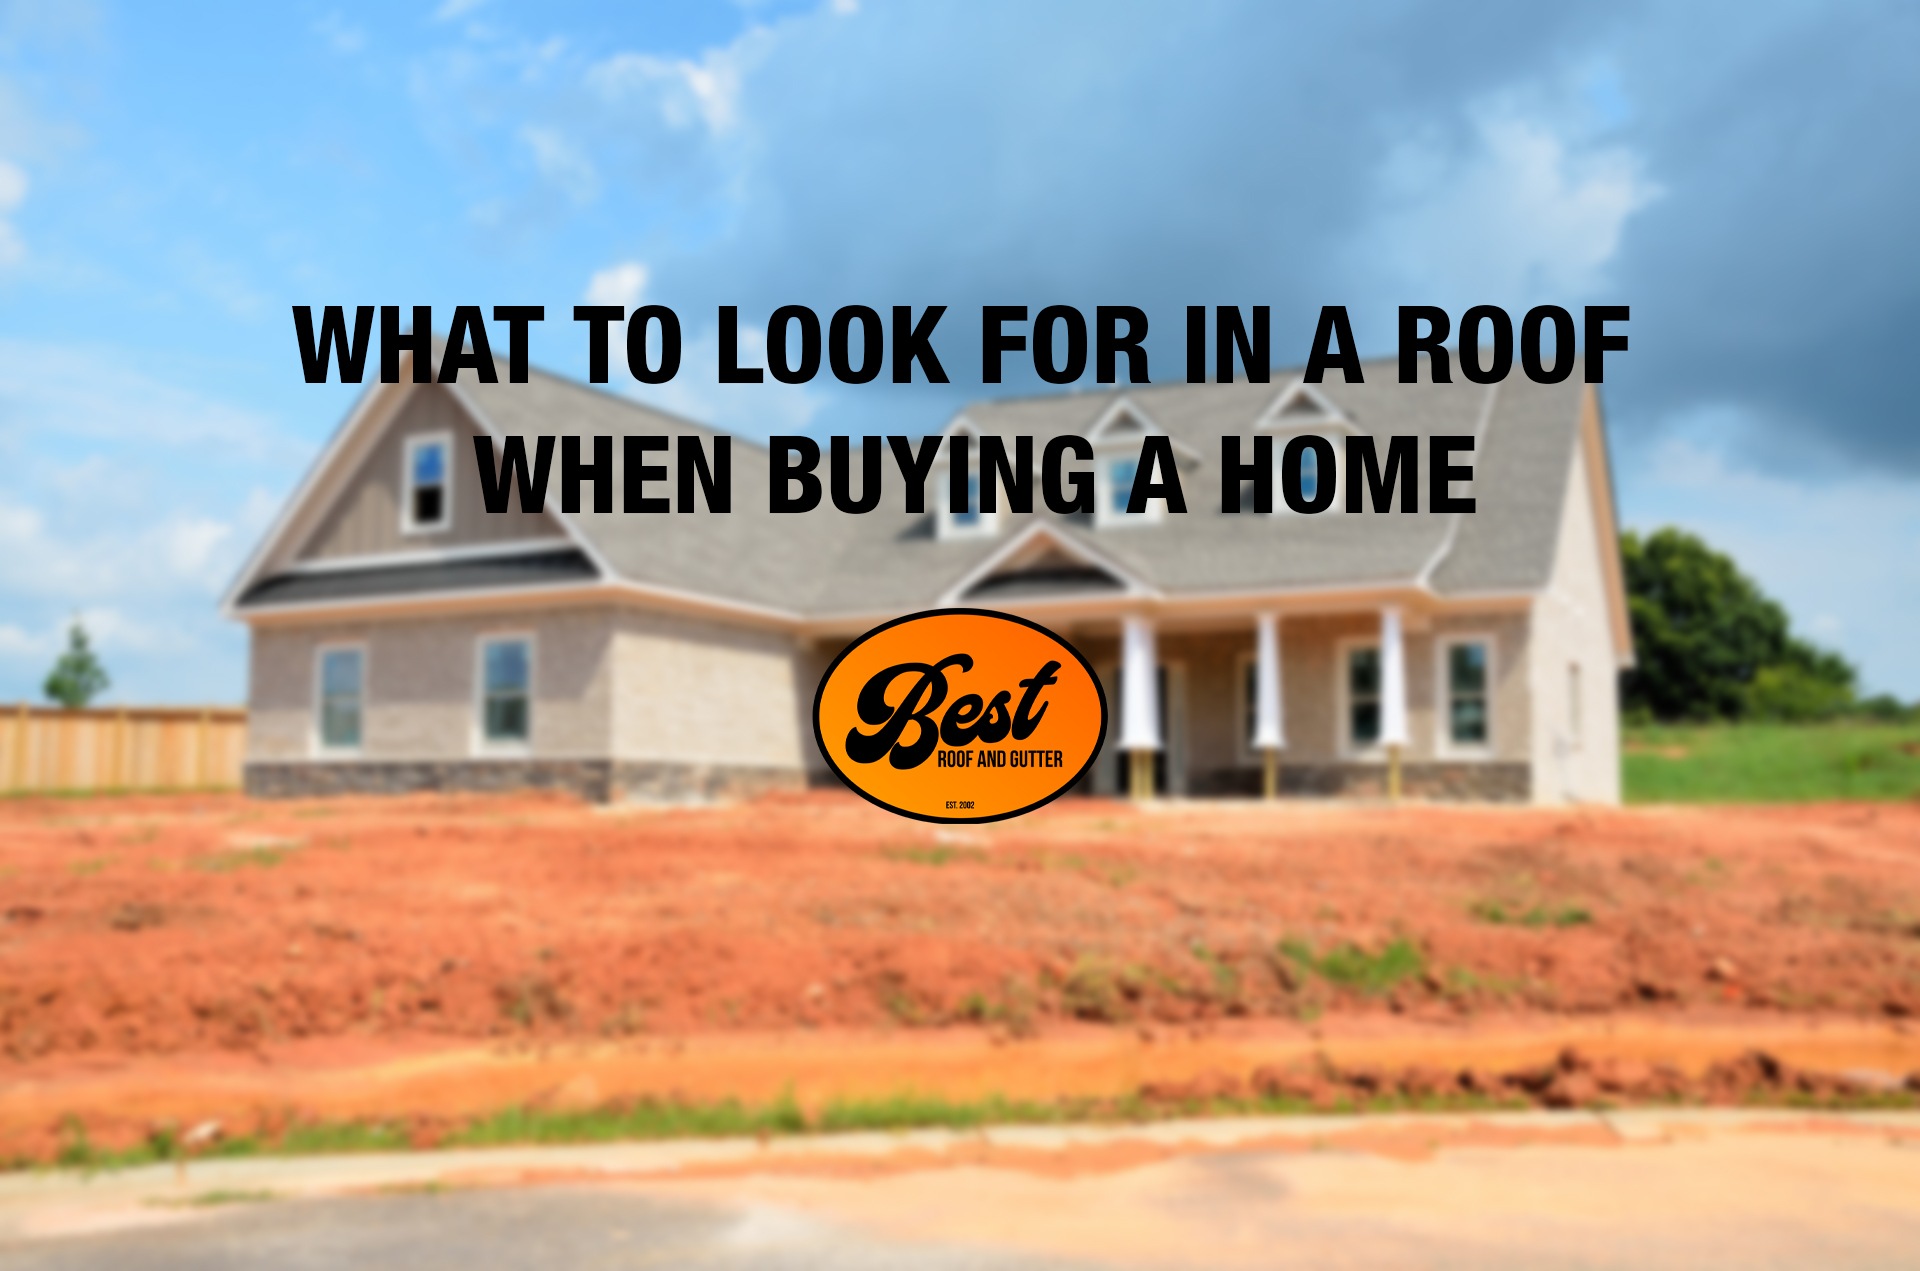 What to Look for in a Roof When Buying a Home